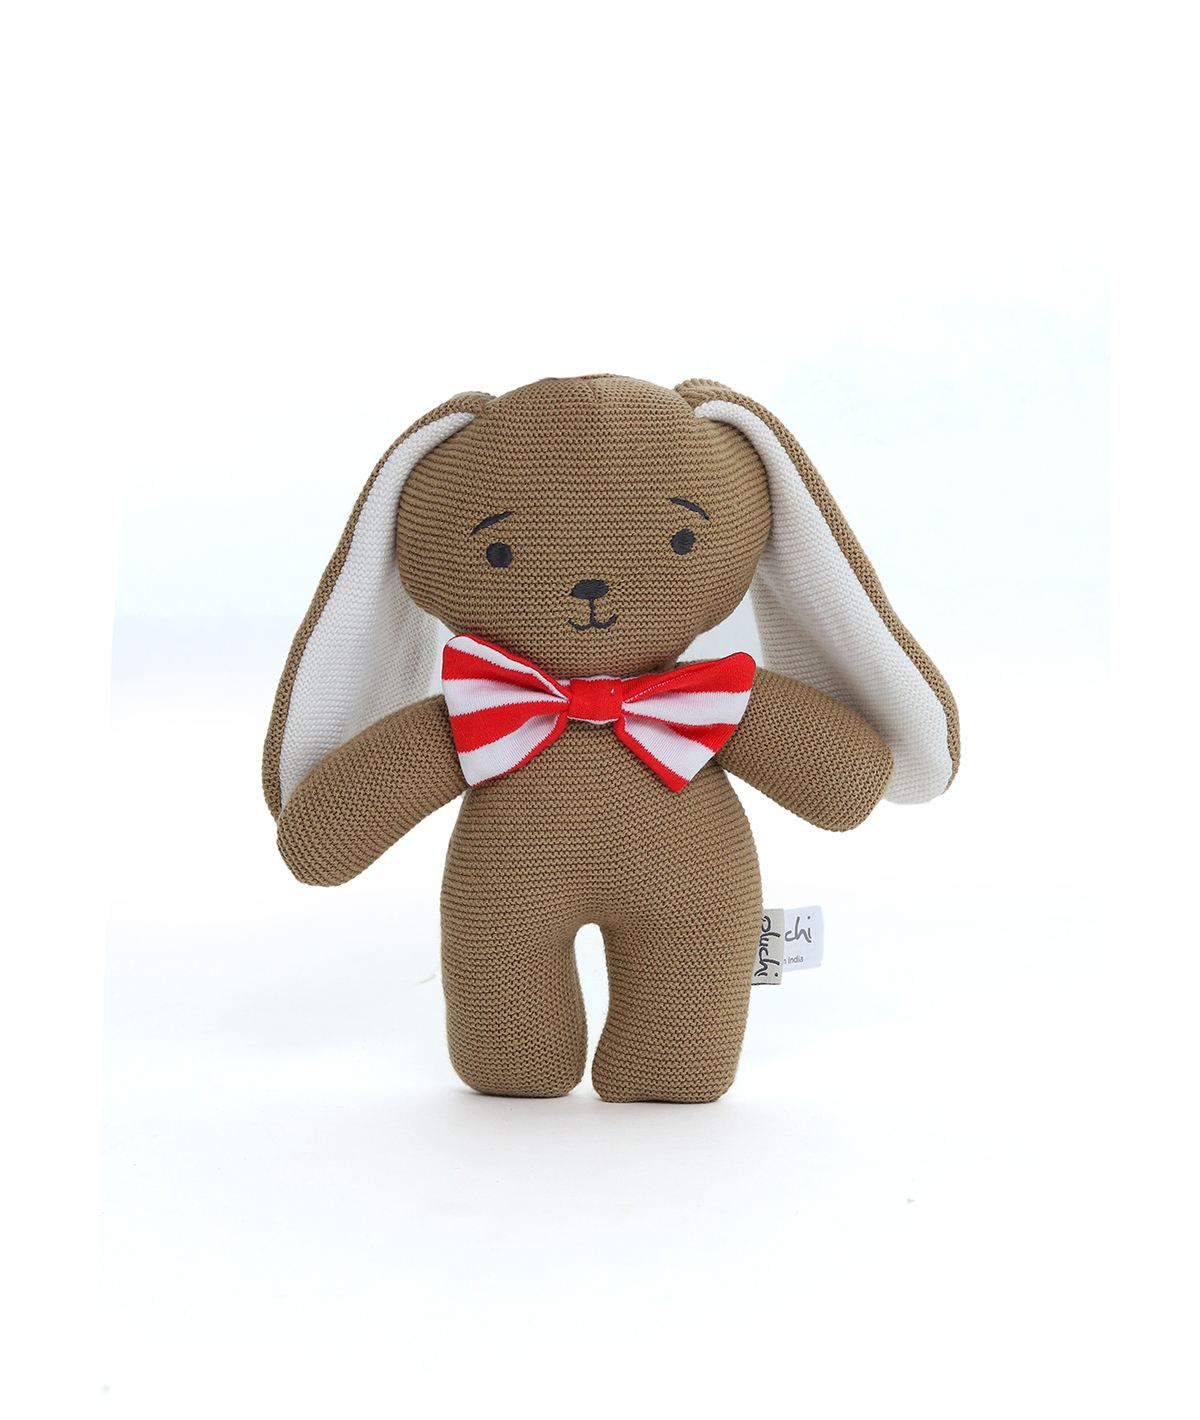 Mr. Bunny Rabbit Cotton Knitted Stuffed Soft Toy (Natural, Light Brown & Red)